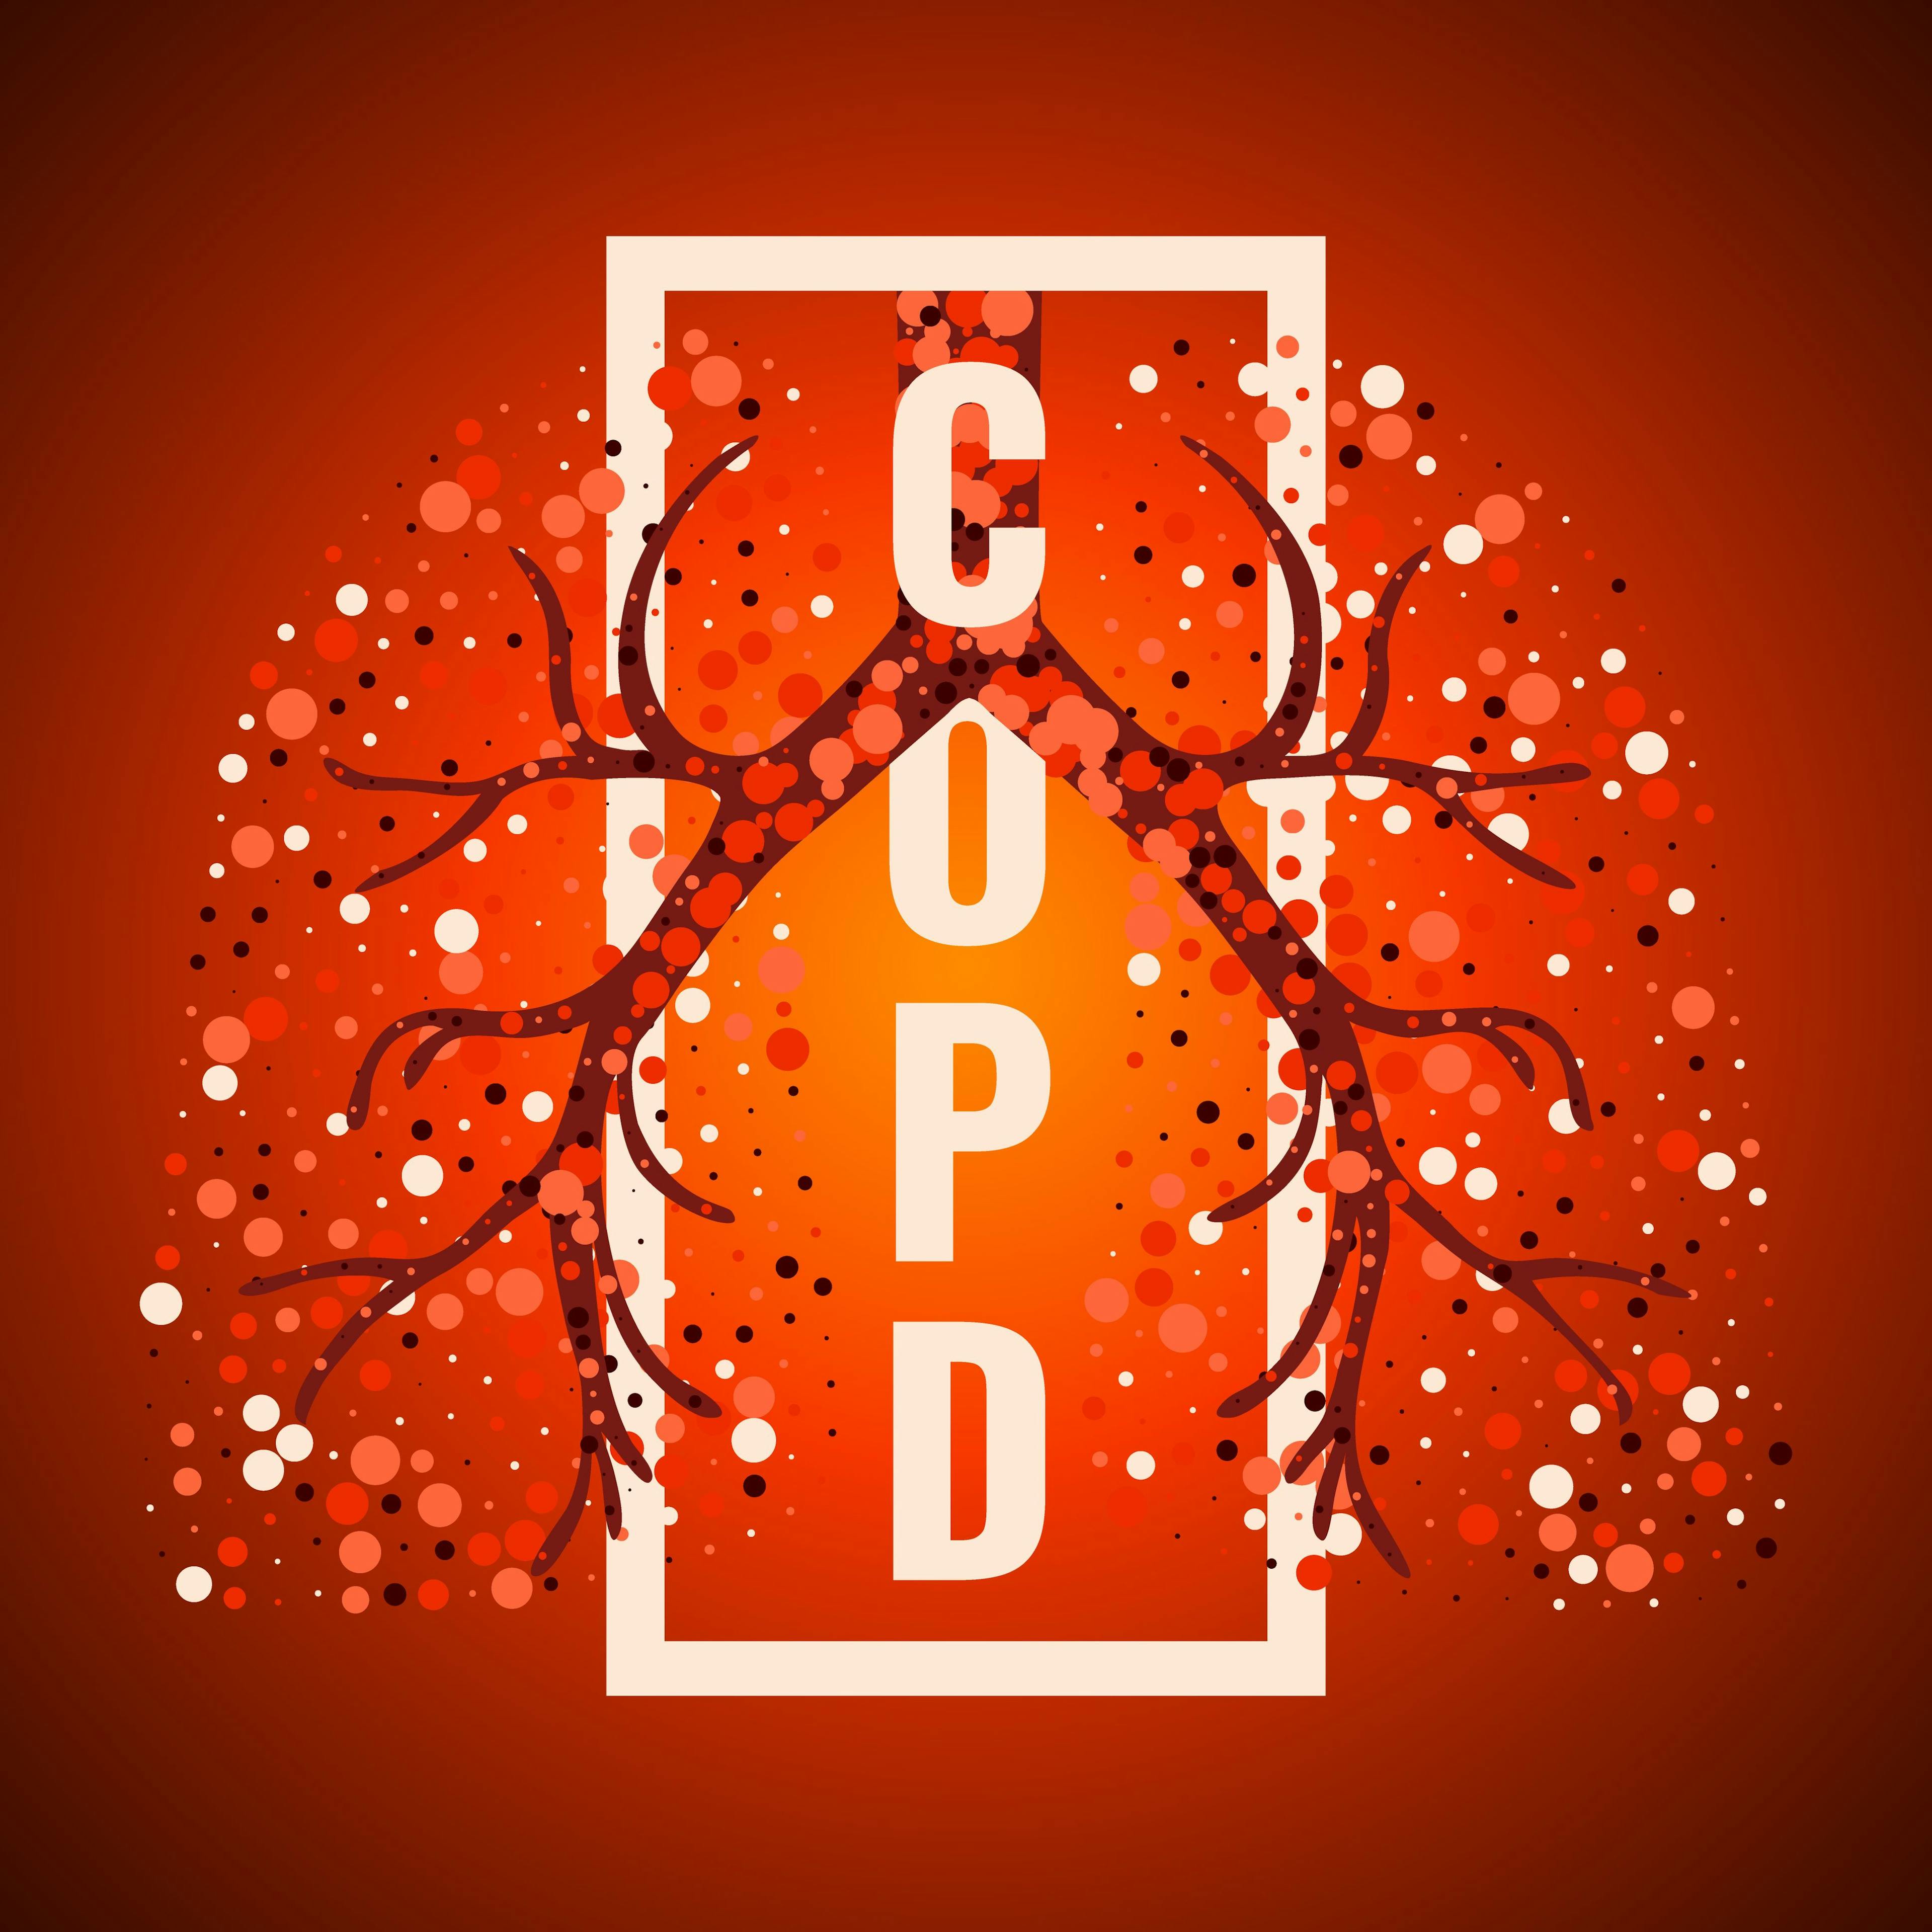 COPD letters on red background | Image credit: © art4stock  stock.adobe.com